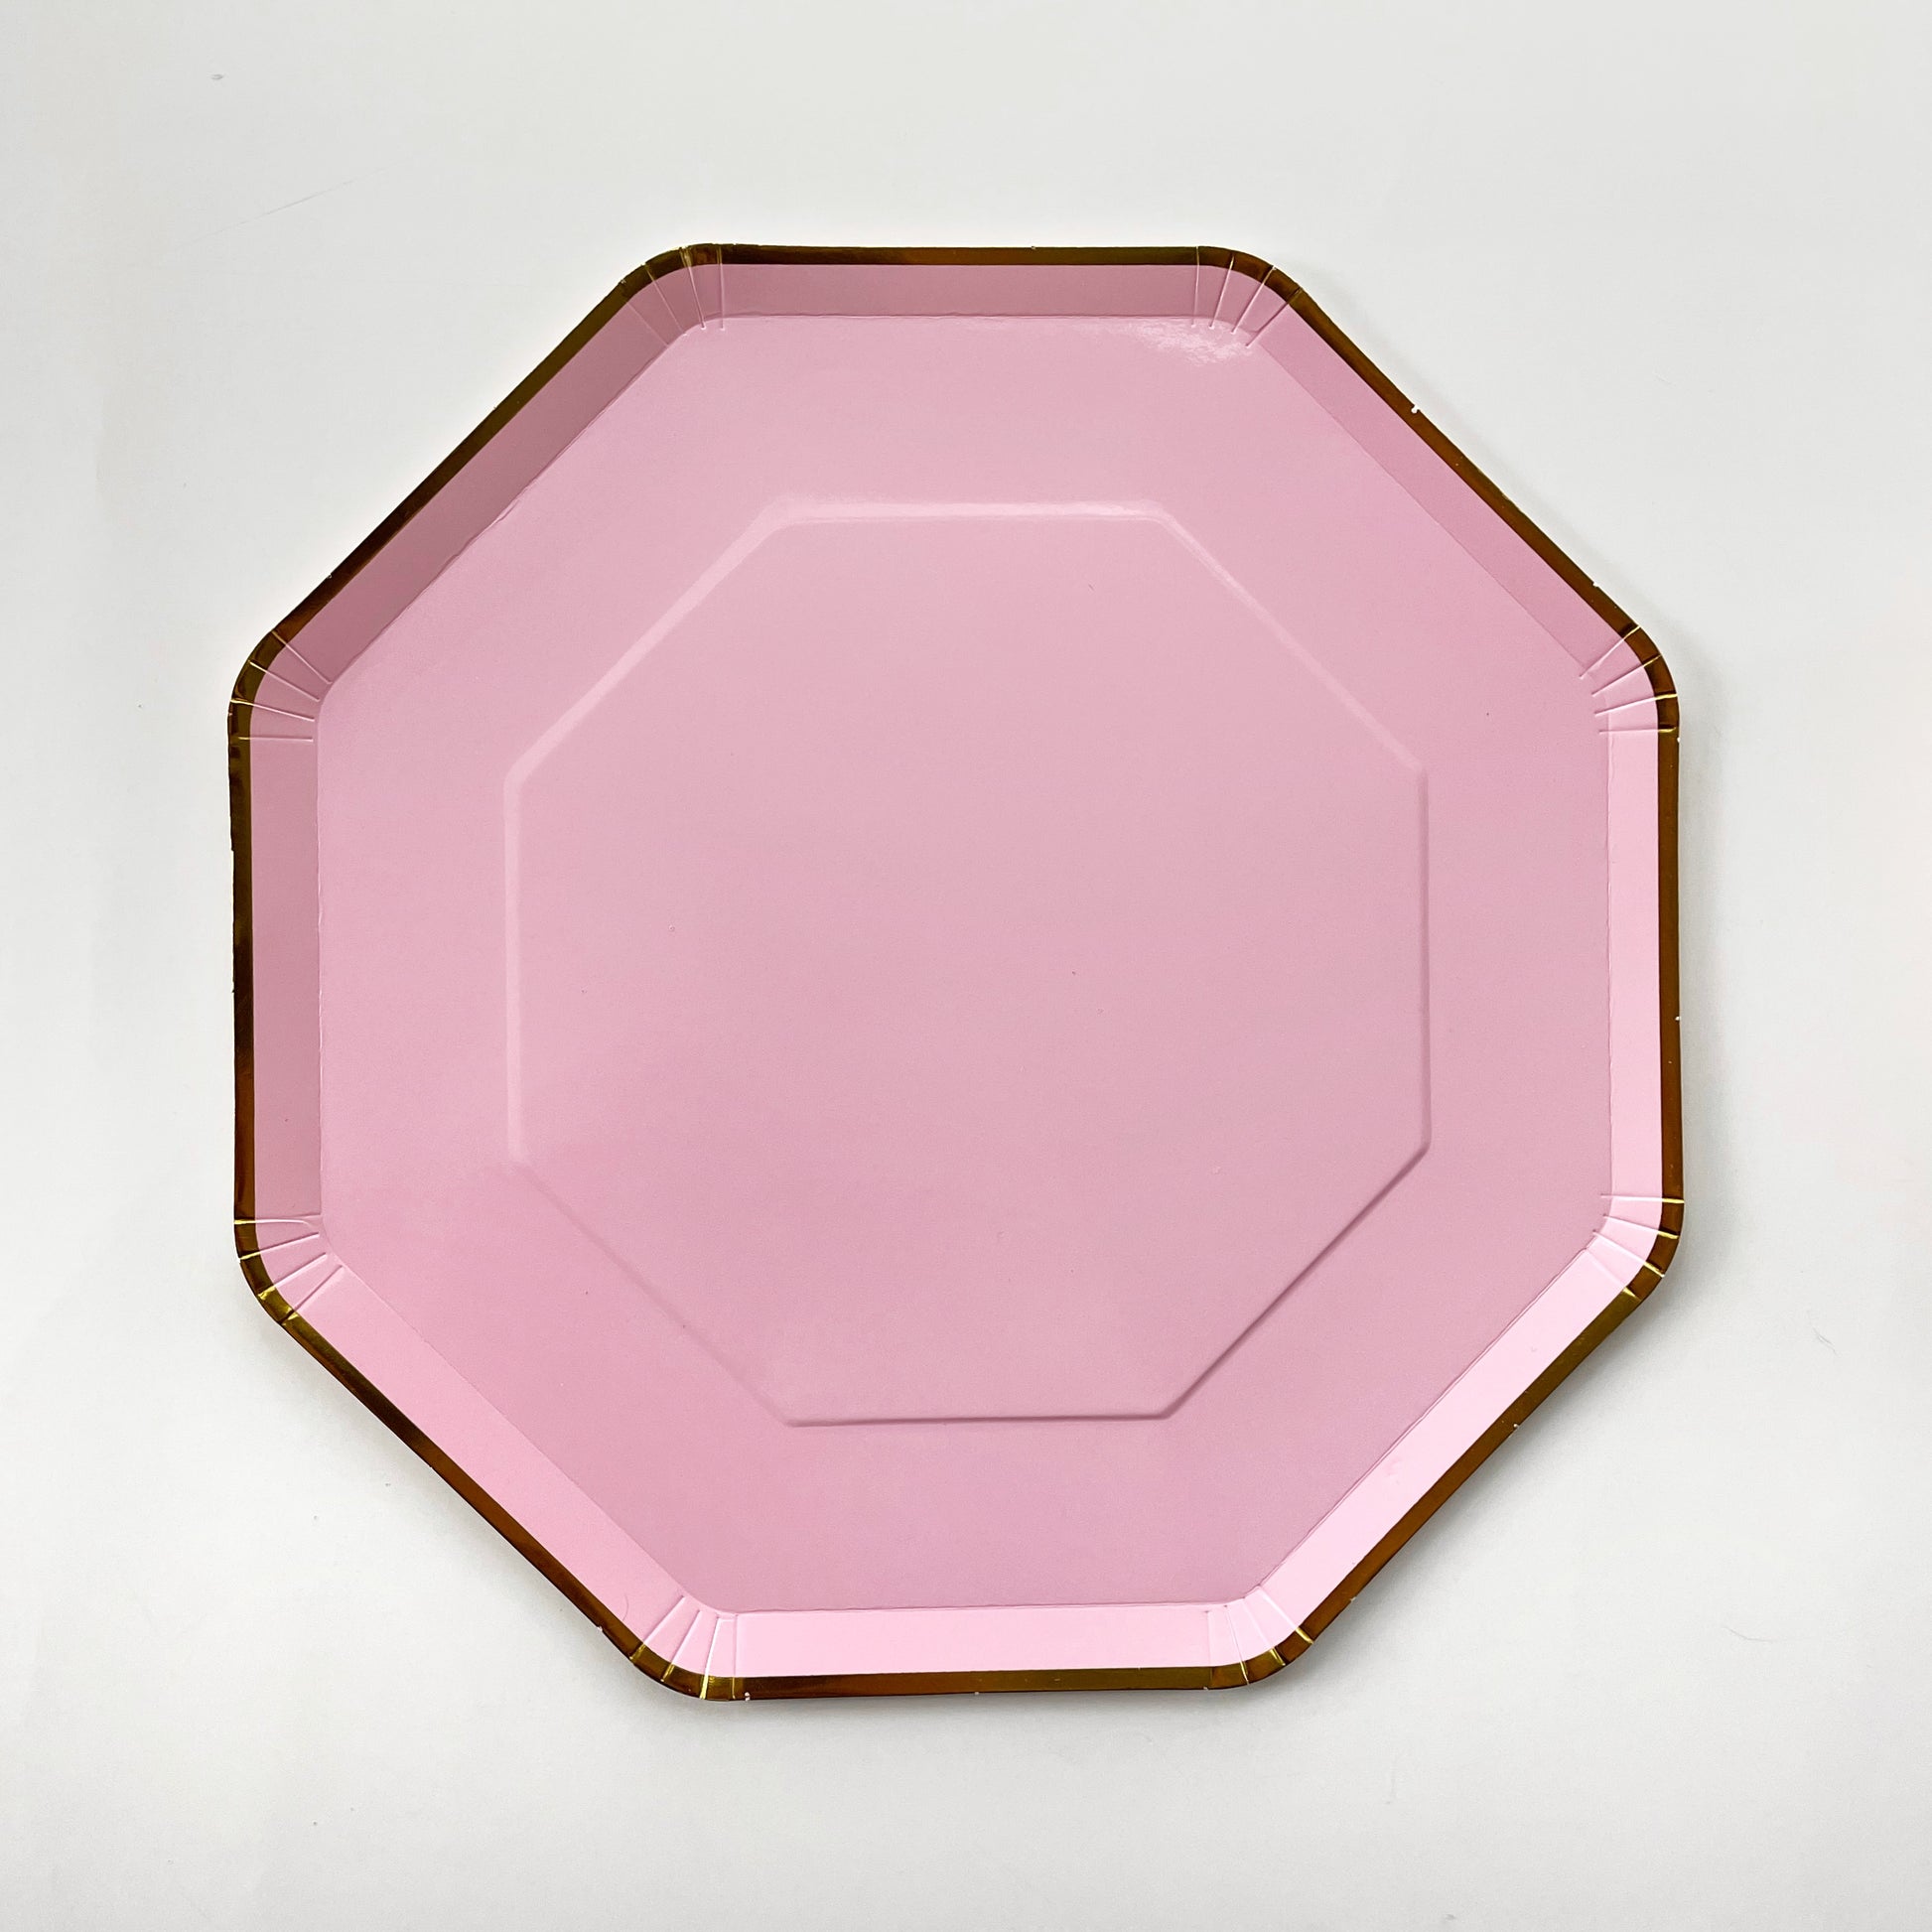 A large pink and gold paper party plate. The large party plates are in the shape of an octagon.